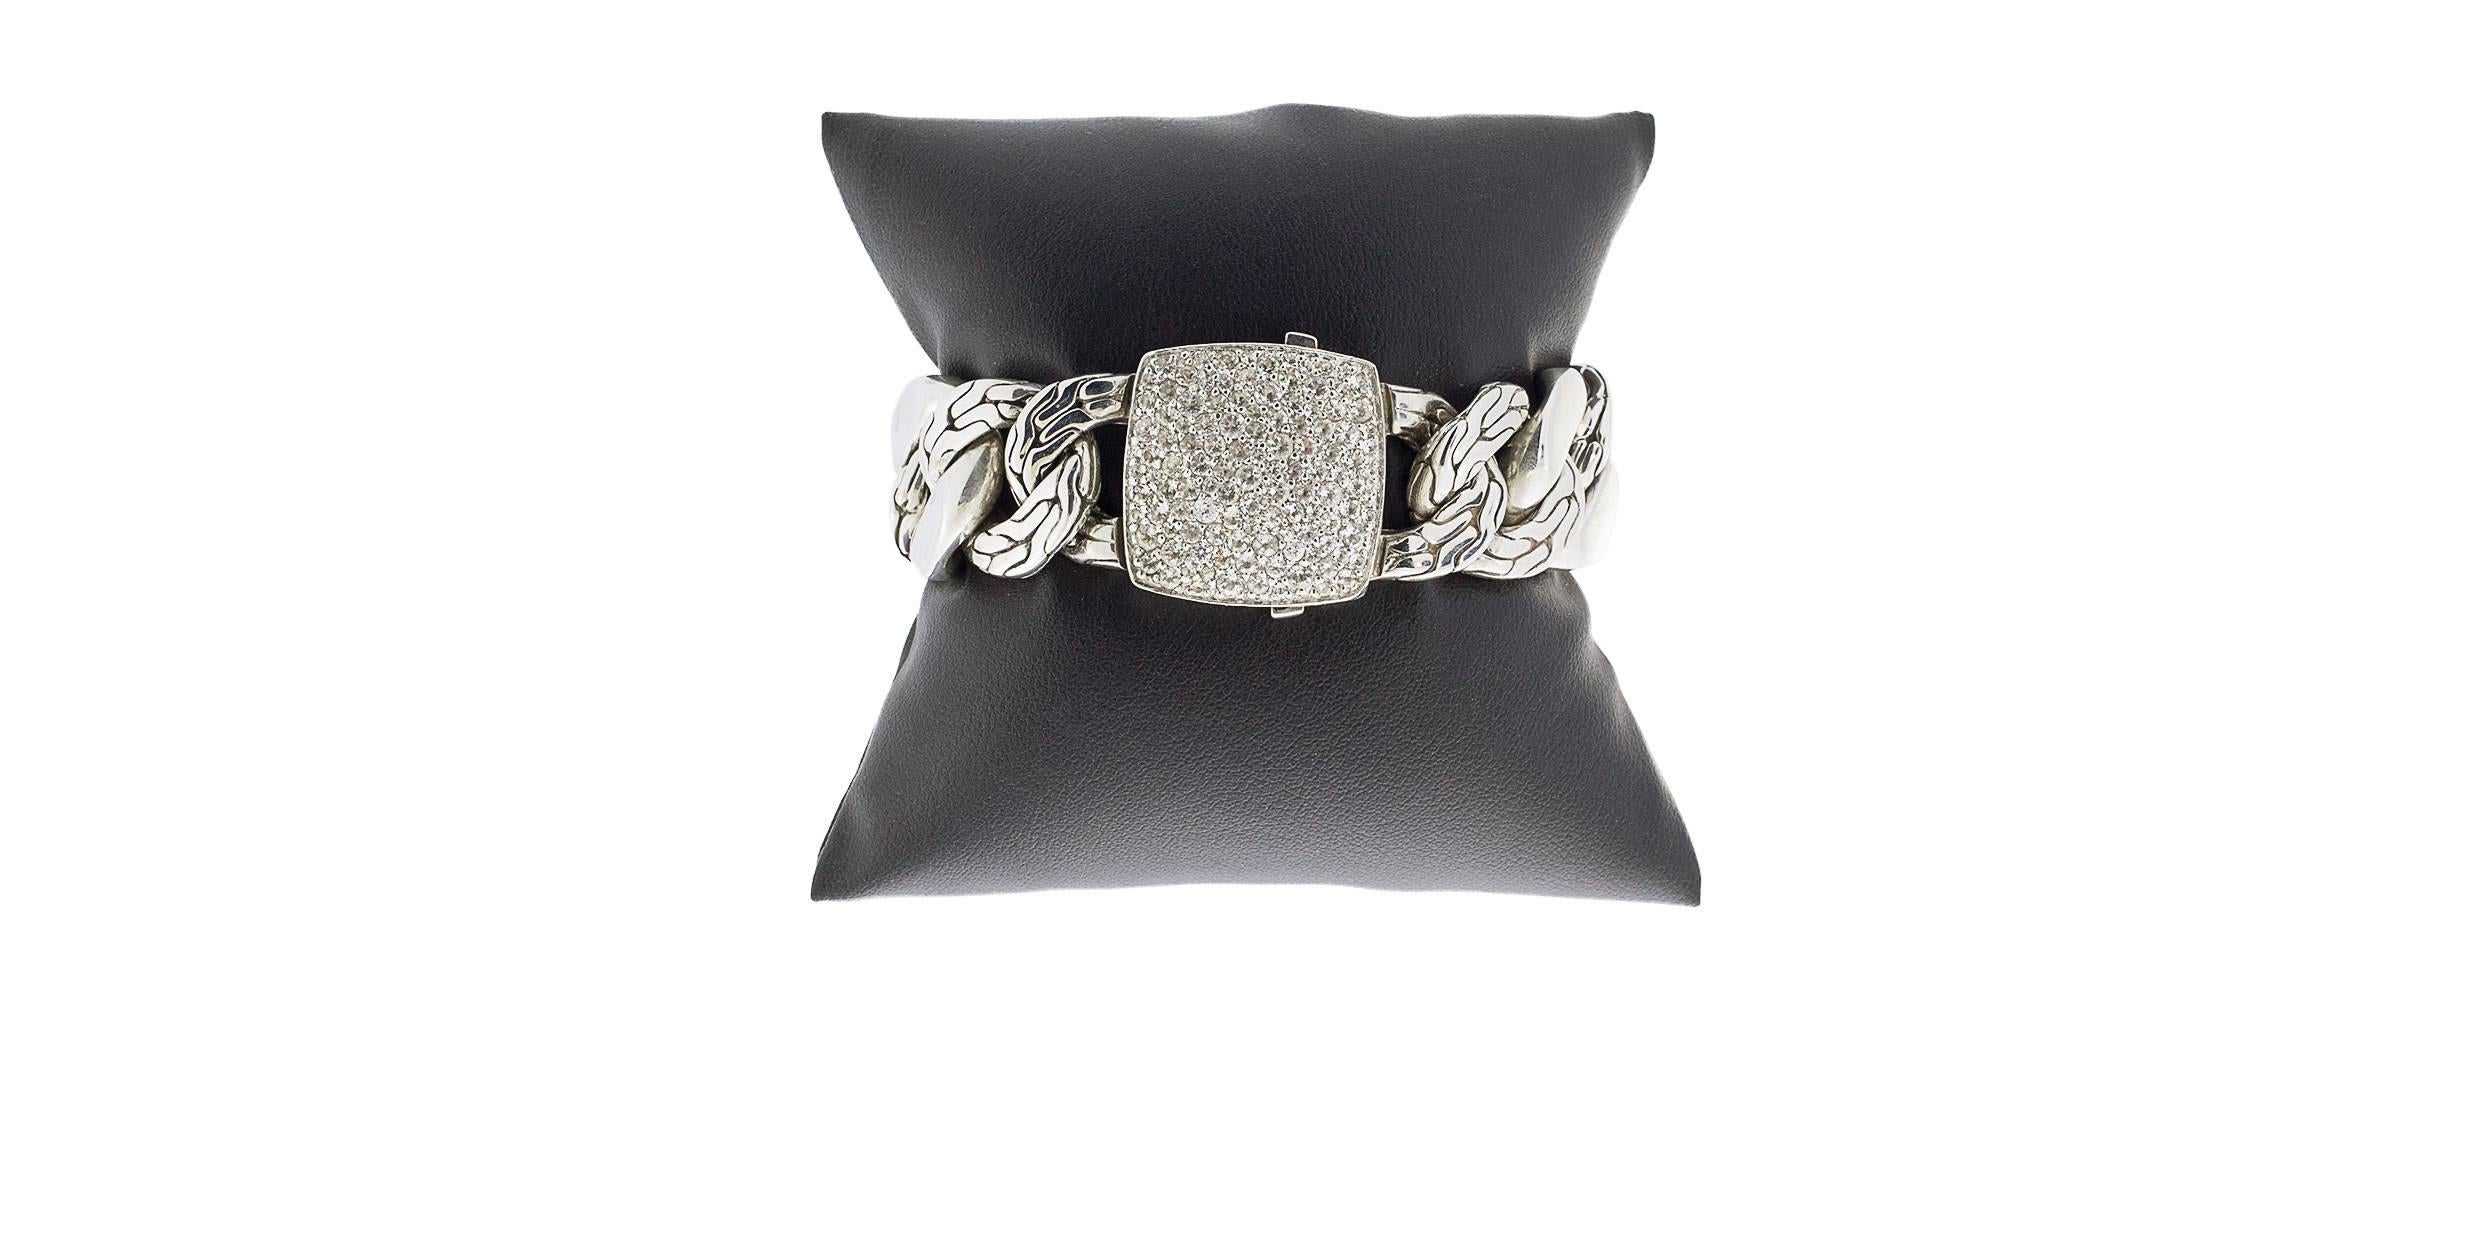 Each piece of John Hardy jewelry has been hand crafted in Bali since 1975. John Hardy is dedicated to creating timeless one-of-a-kind pieces that are brilliantly alive. This beautiful John Hardy bracelet features a pave set cubic zirconia (CZ) clasp